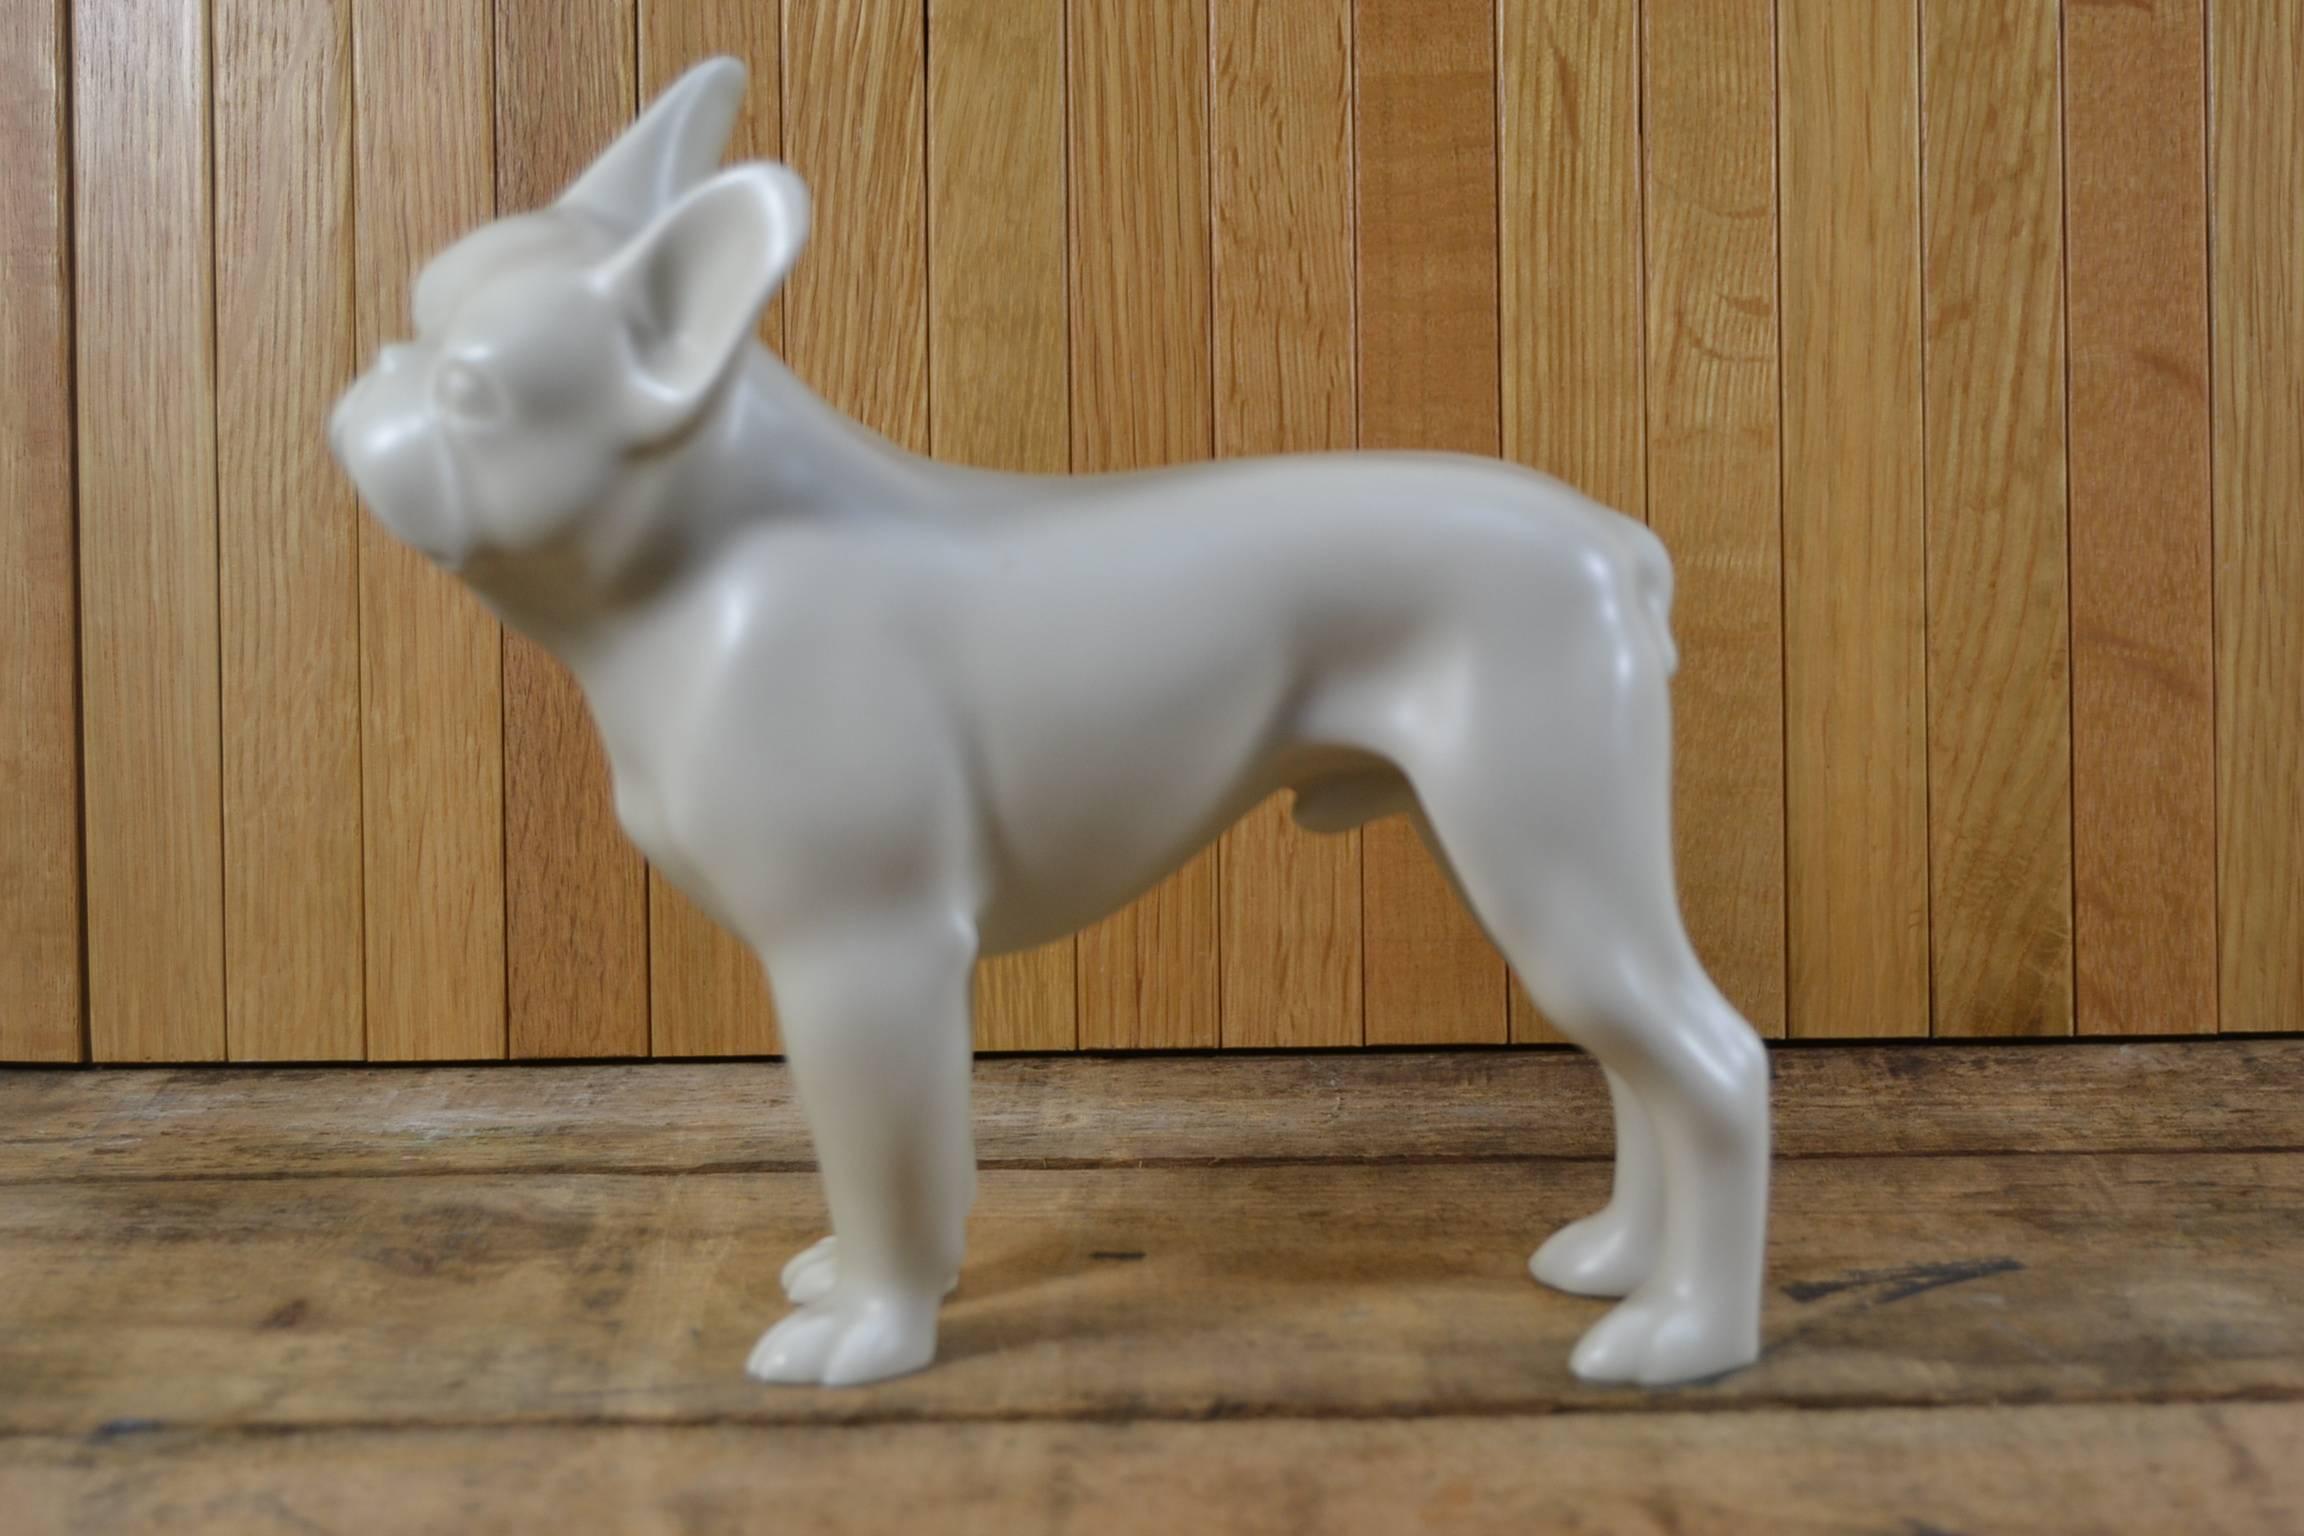 Superb rare Art Deco matte white porcelain French Bulldog, Frenchie.
Made by B&G, Bing & Grondahl, Denmark, 1930. 
French bulldog collectible from Denmark, Franske Bulldogs. 
With stamp and number 2165/11.
Original old sculpture, that for that